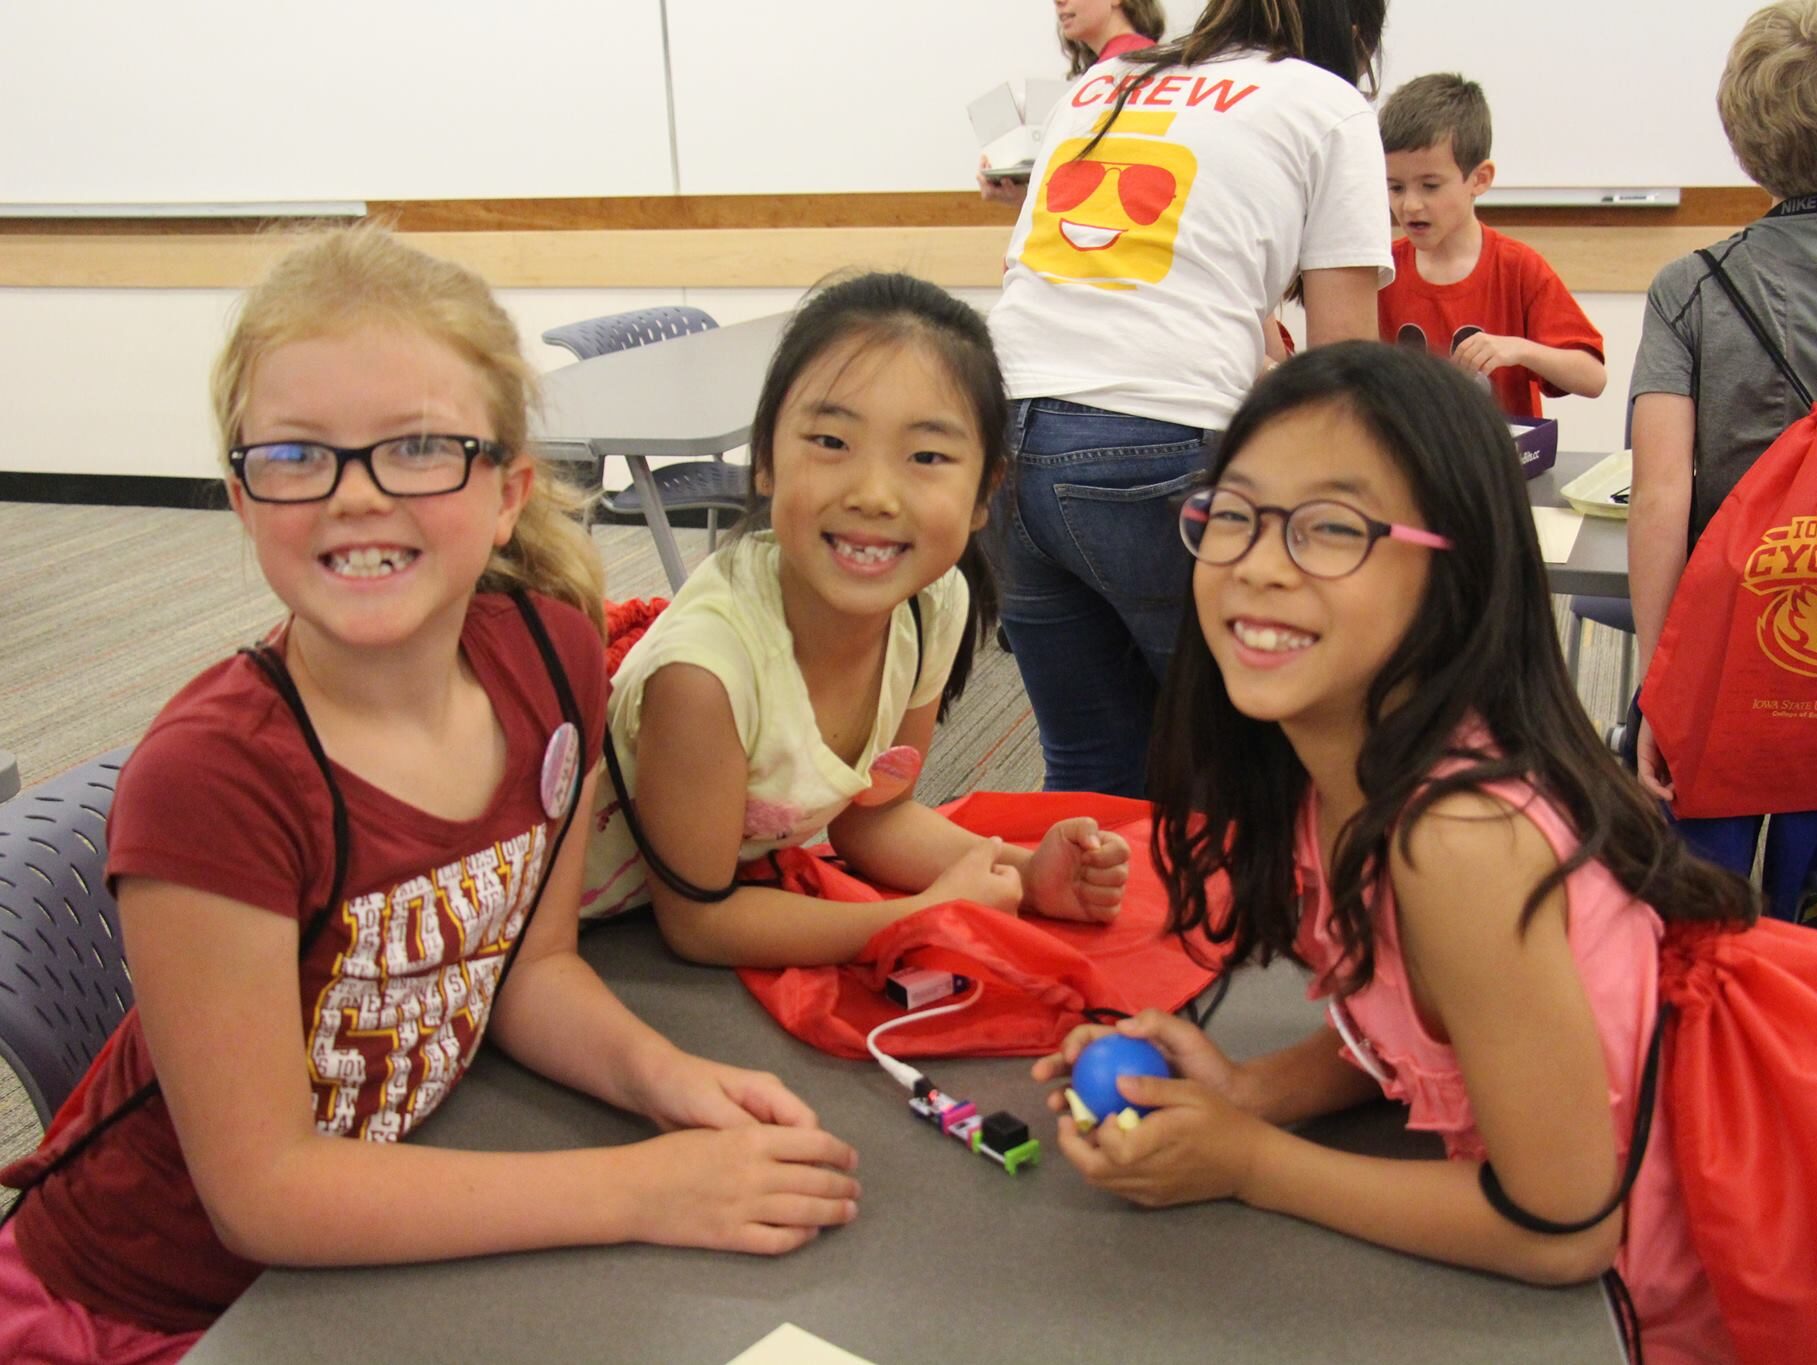 Three school-aged girls smiling while attending a STEM workshop.